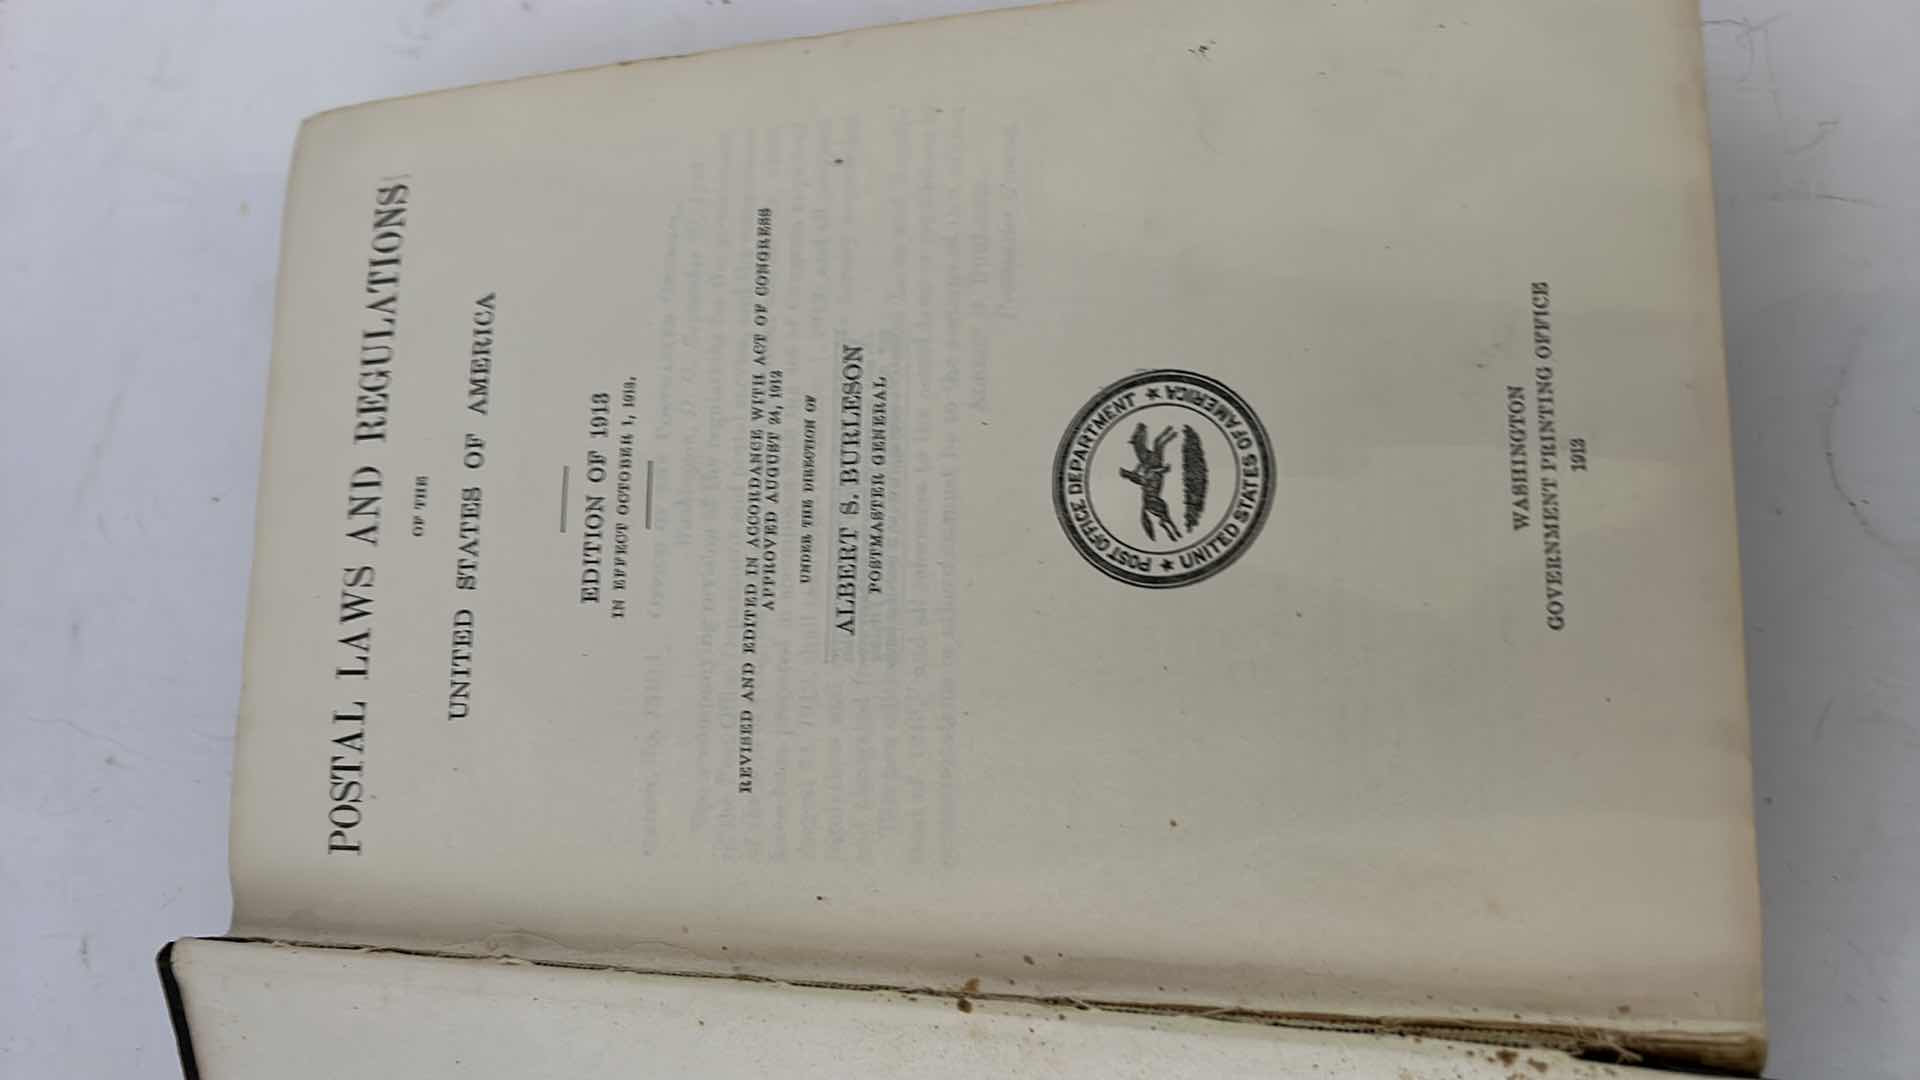 Photo 4 of VINTAGE 1913 HARDCOVER BOOK “POSTAL LAWS AND REGULATIONS”